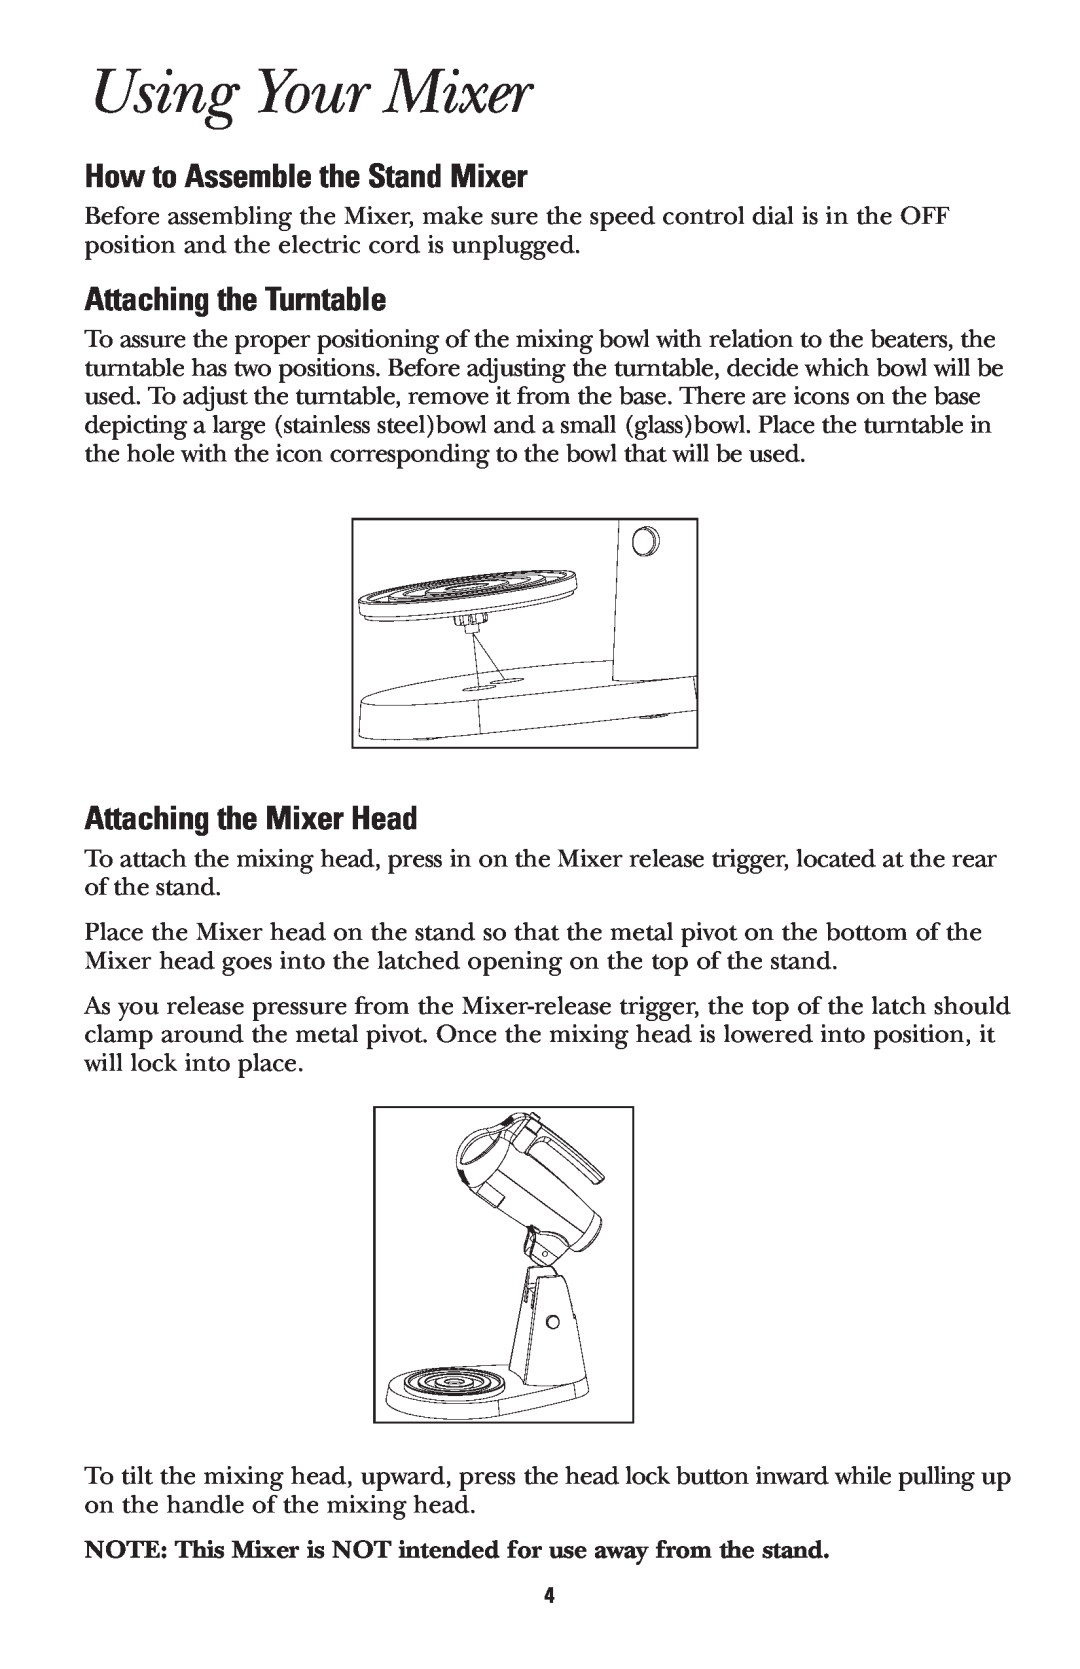 GE 168949 manual Using Your Mixer, How to Assemble the Stand Mixer, Attaching the Turntable, Attaching the Mixer Head 